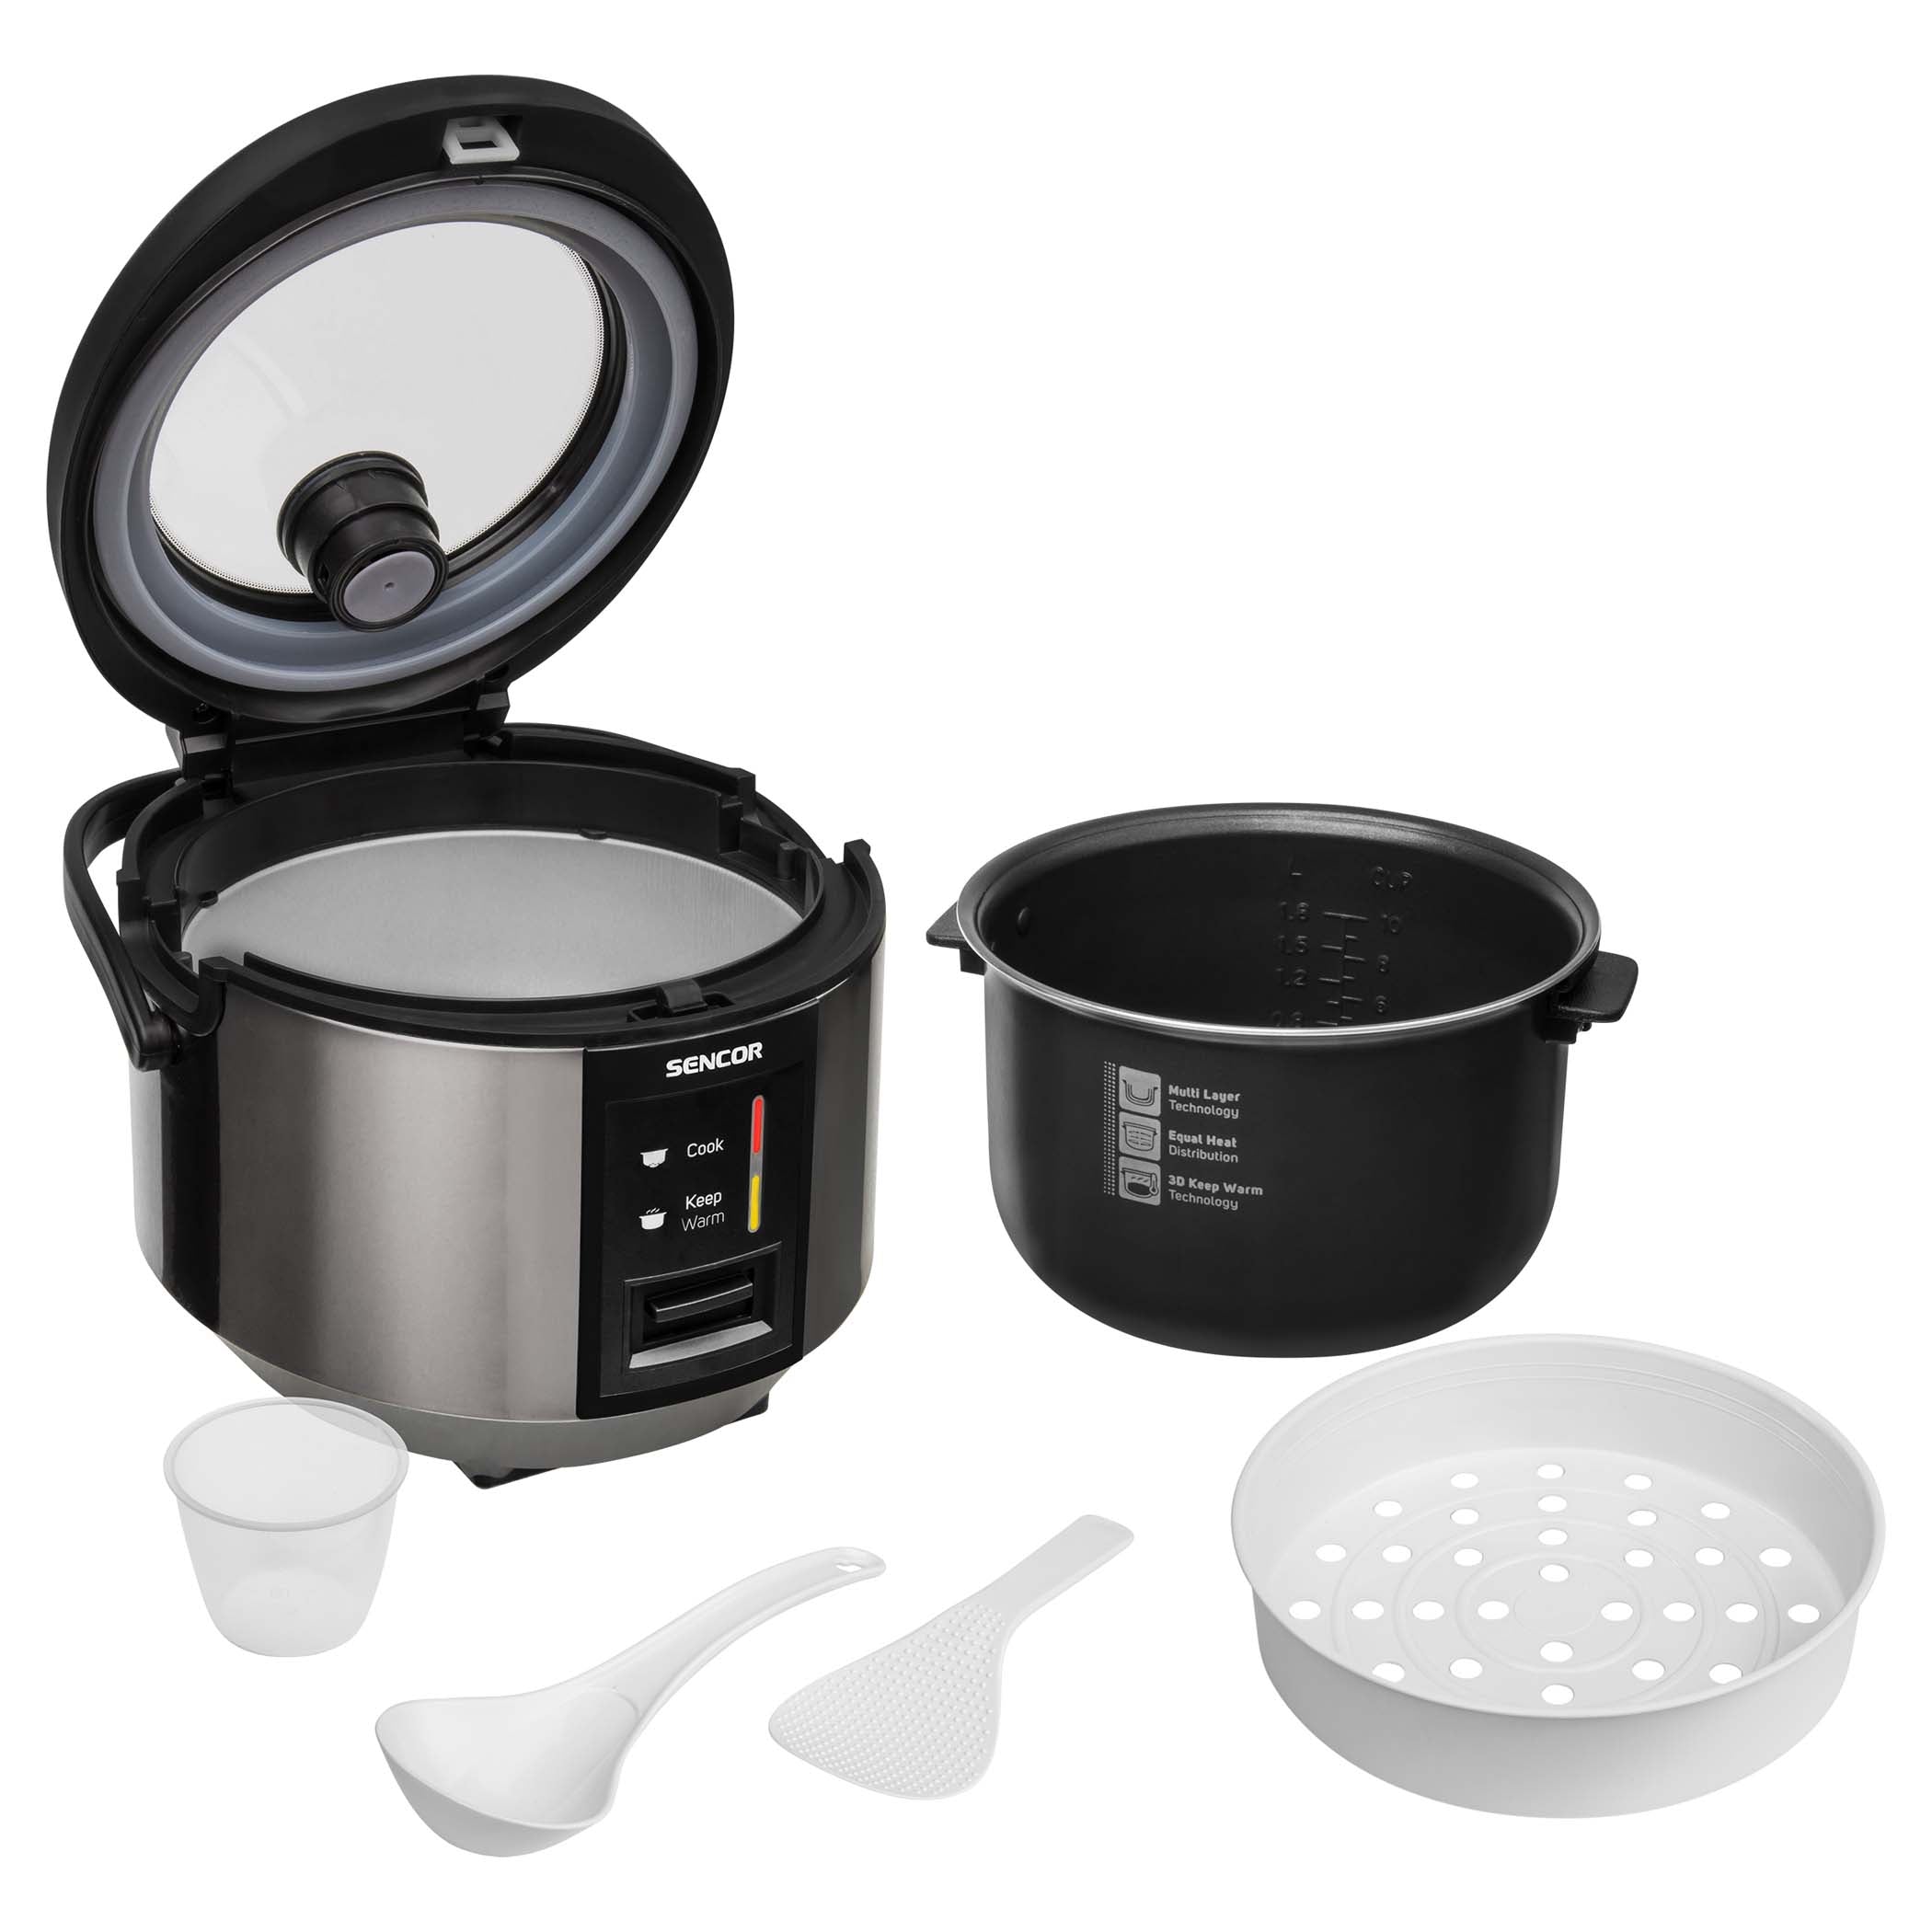 Multifunctional Rice Cooker, SRM 3150SS